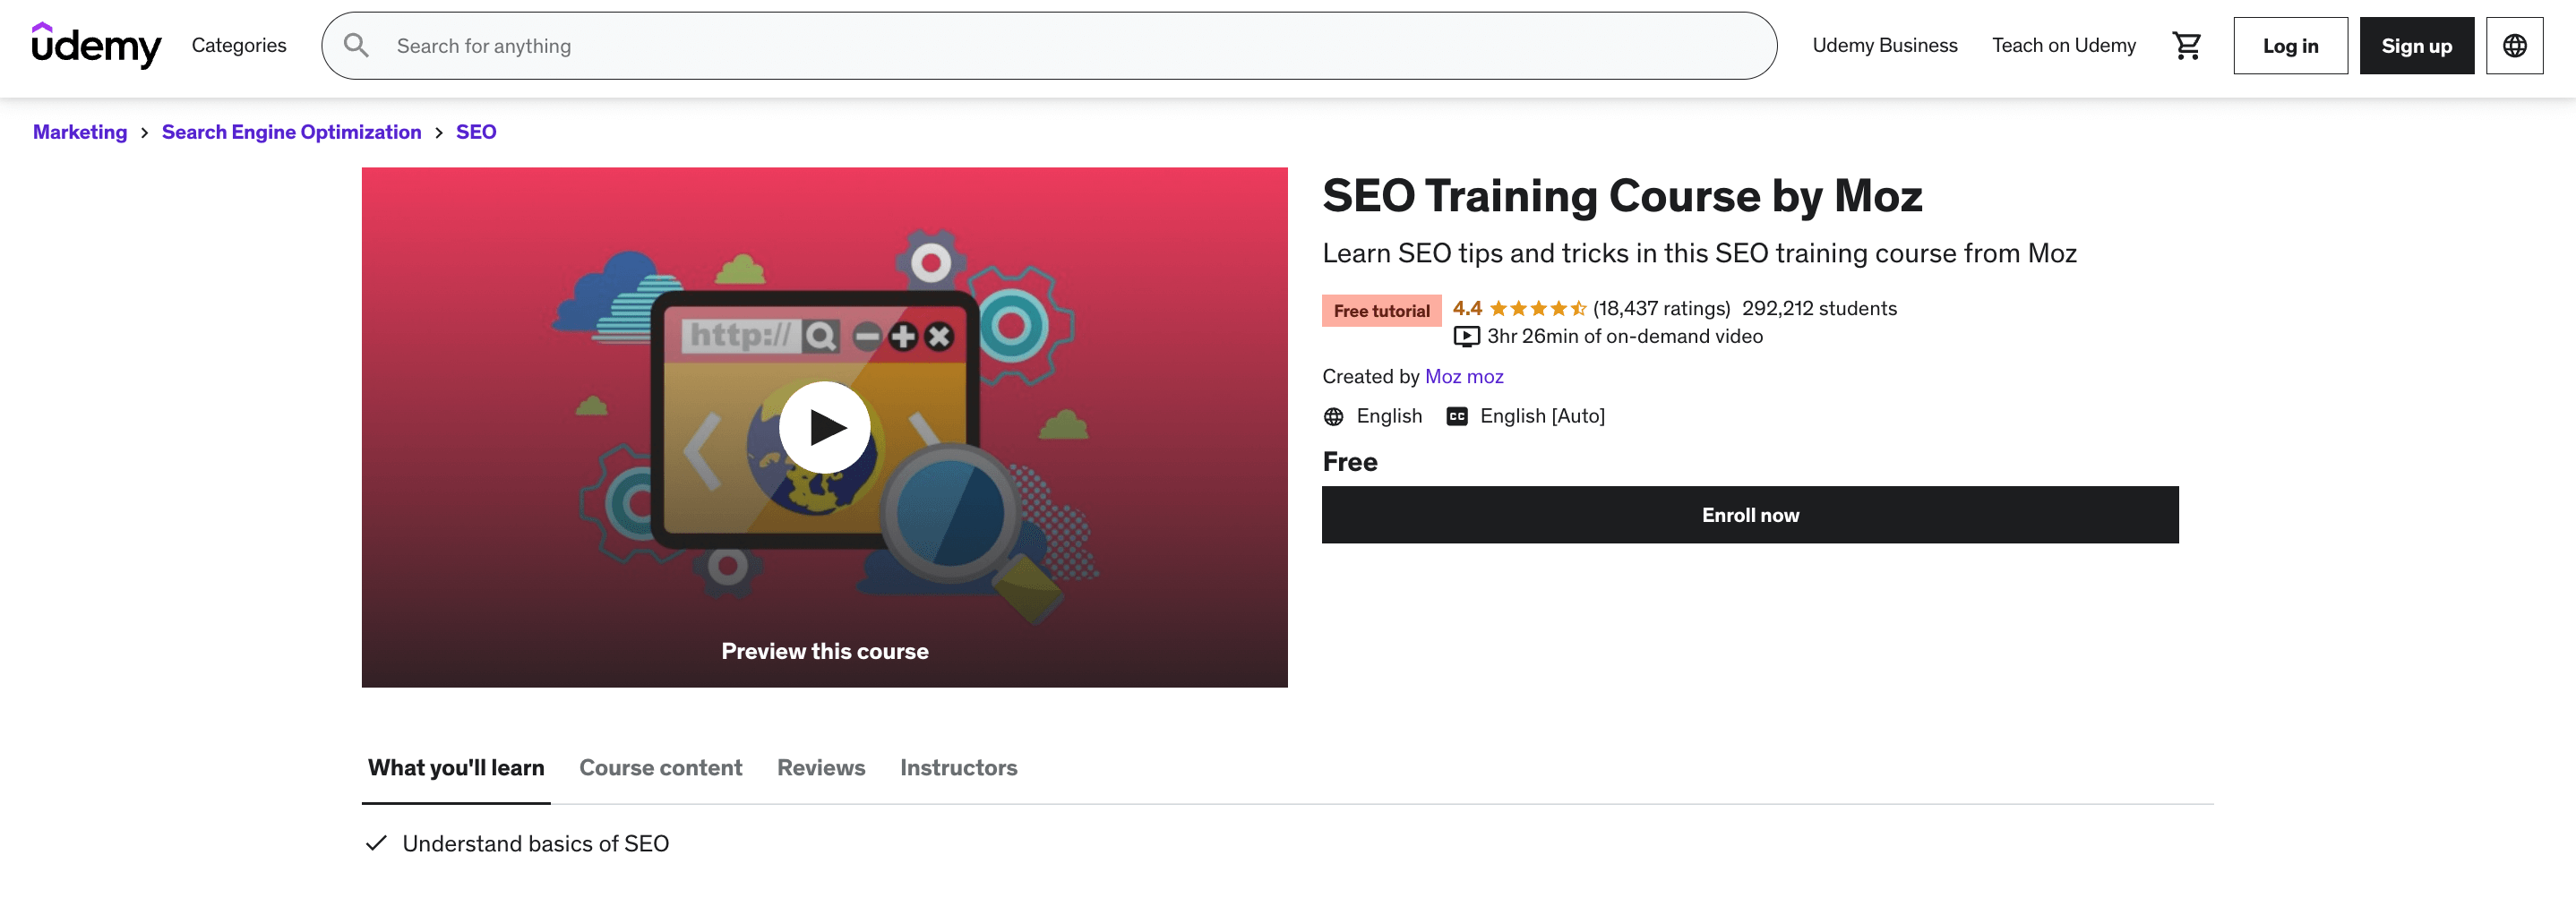 Homepage of Udemy's SEO Training Course